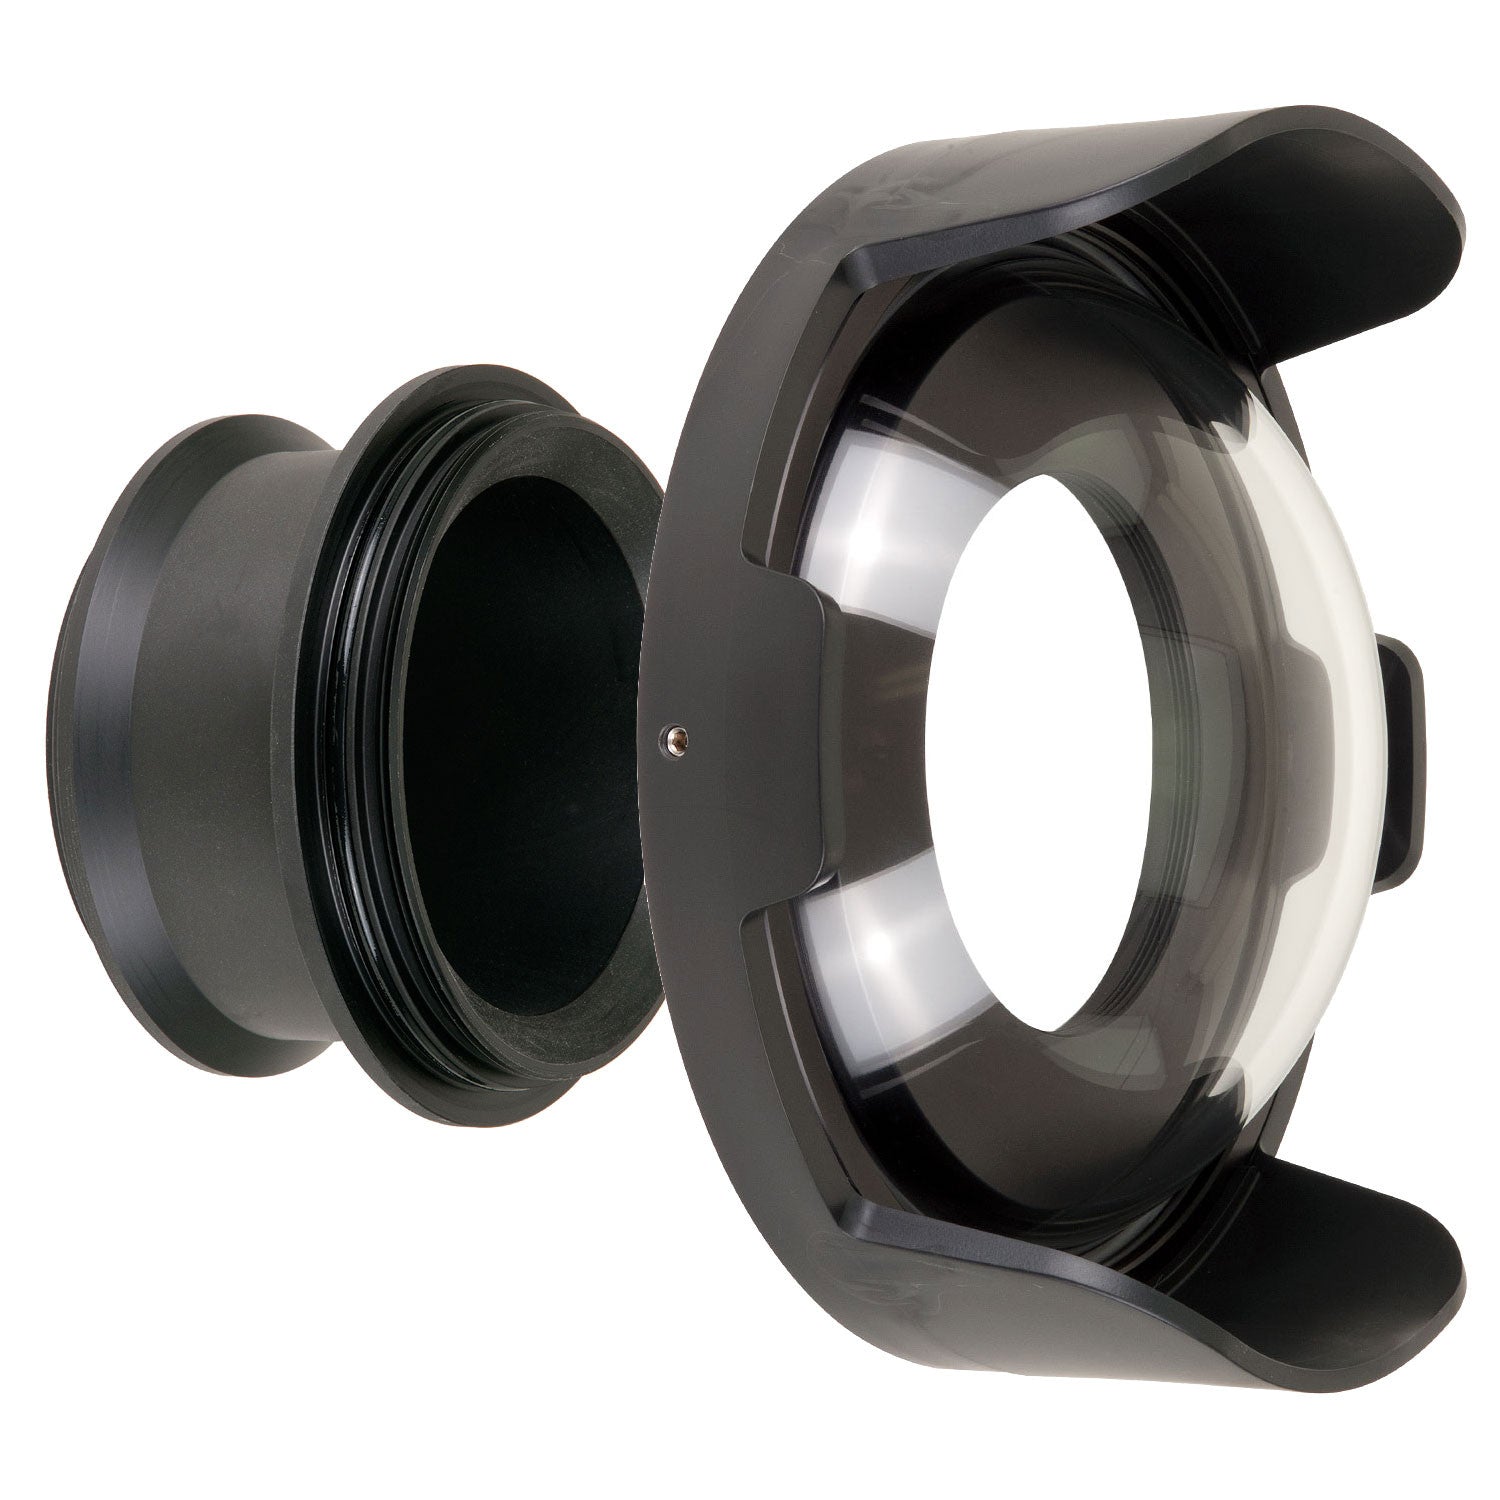 FL 8 inch Dome Kit for Lenses Up To 4.25 Inches